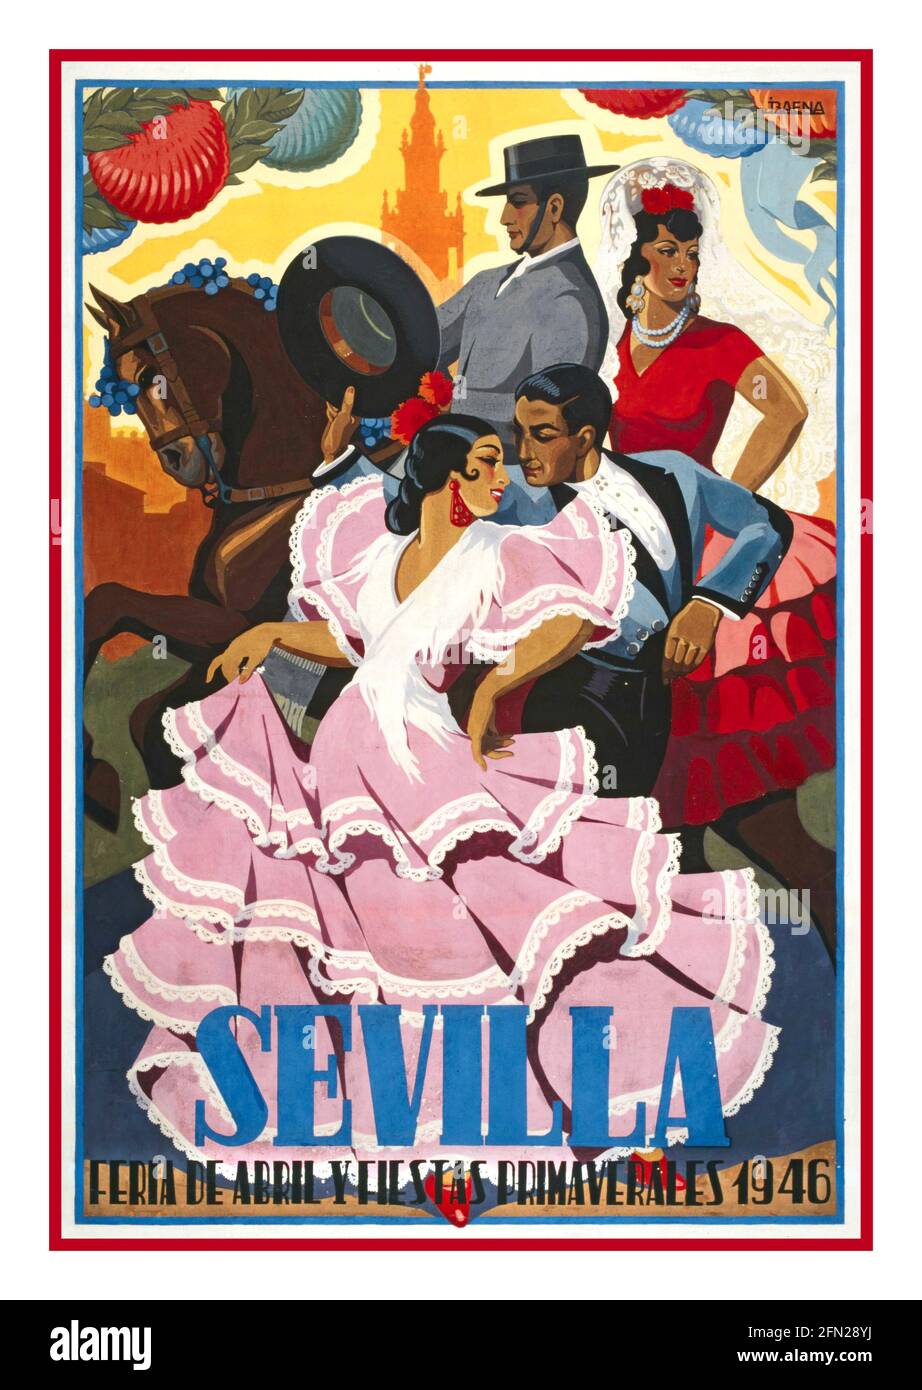 SEVILLA Vintage Spanish Travel Poster Spain 1946 Seville April Fair Travel Poster Vintage 1946 advertising poster by J. Baena announcing the annual Seville April Fair Fiesta which is held in Andalusian capital Spain every year Stock Photo